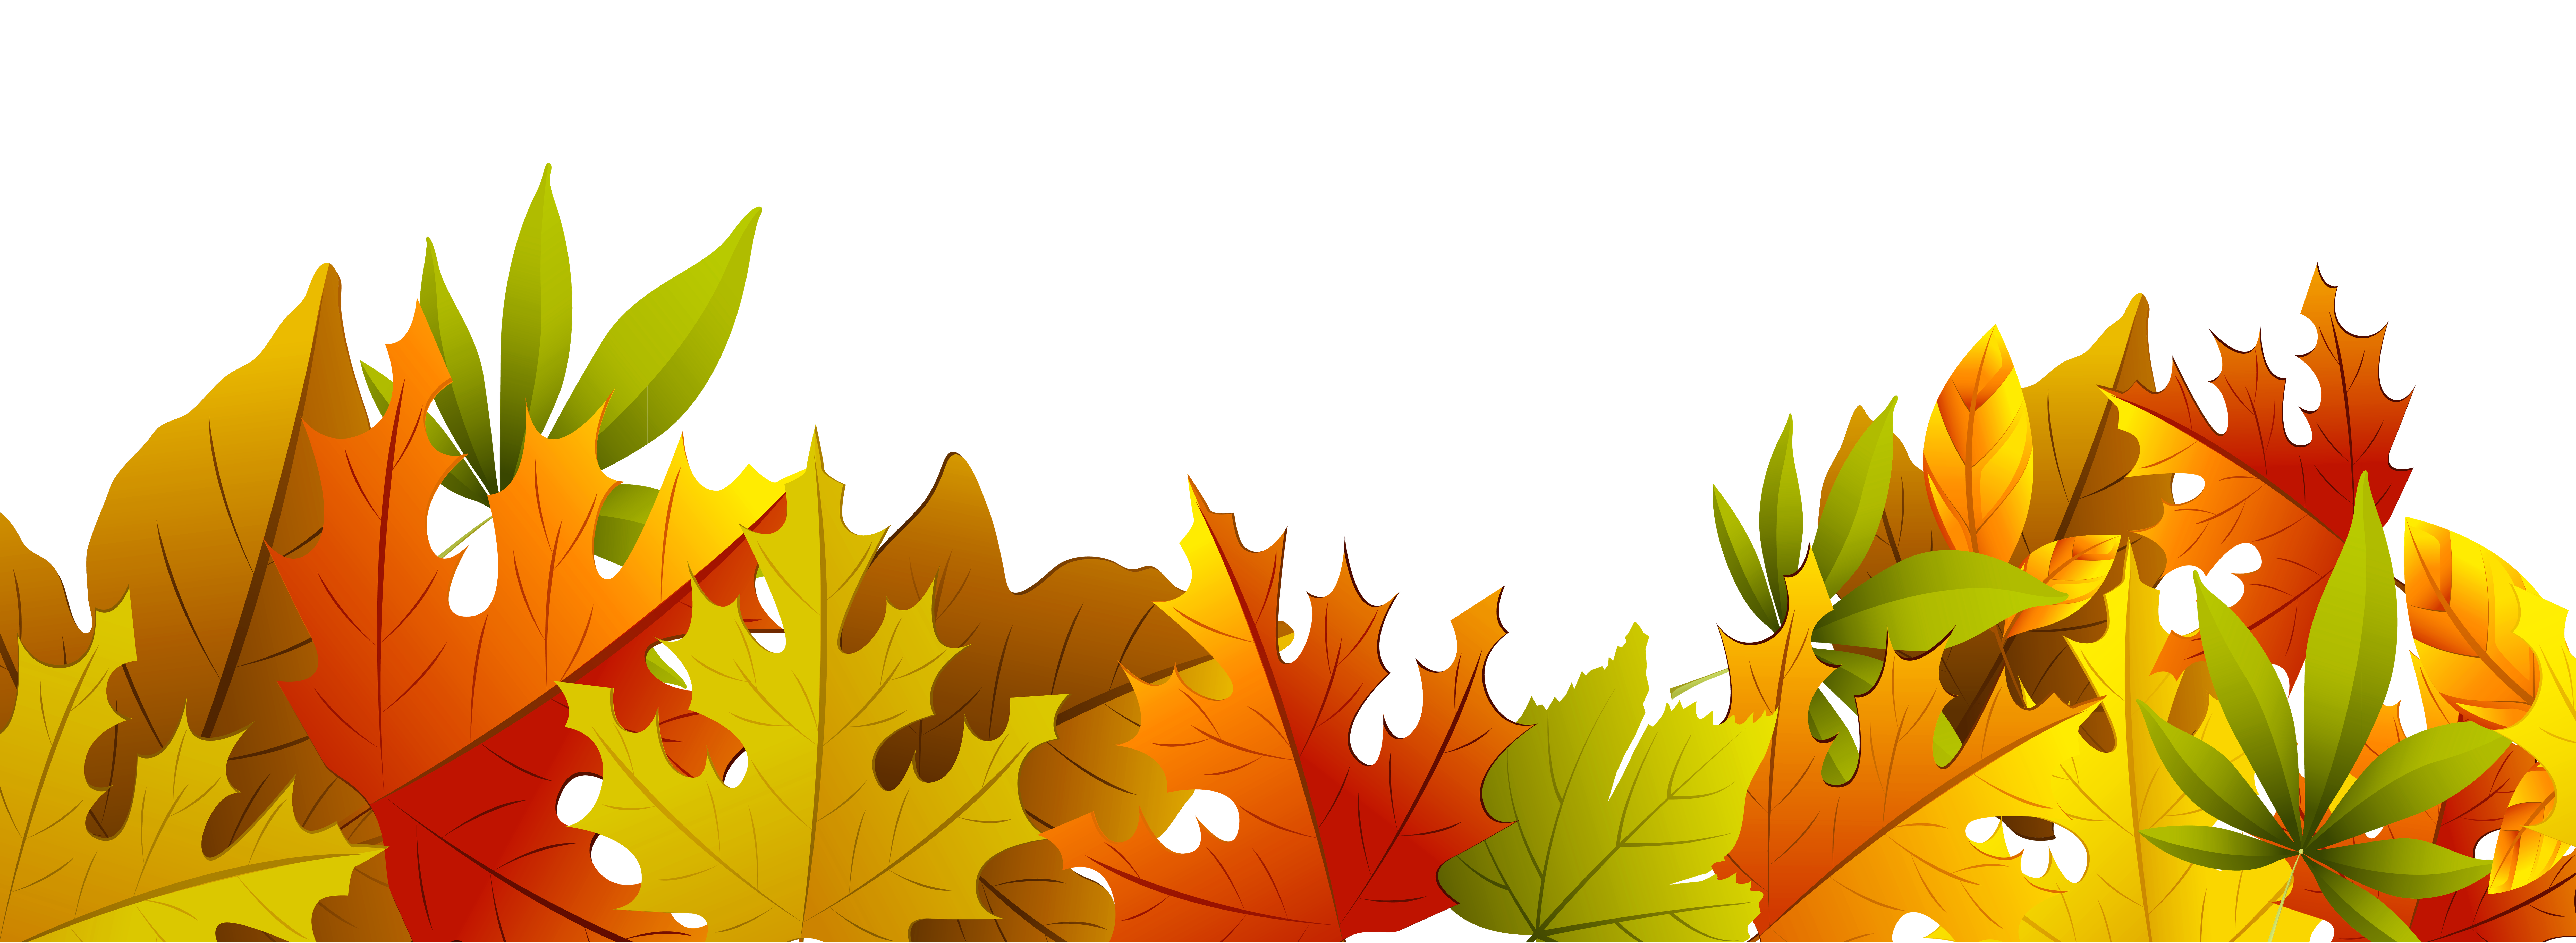 free-autumn-leaves-border-png-download-free-autumn-leaves-border-png